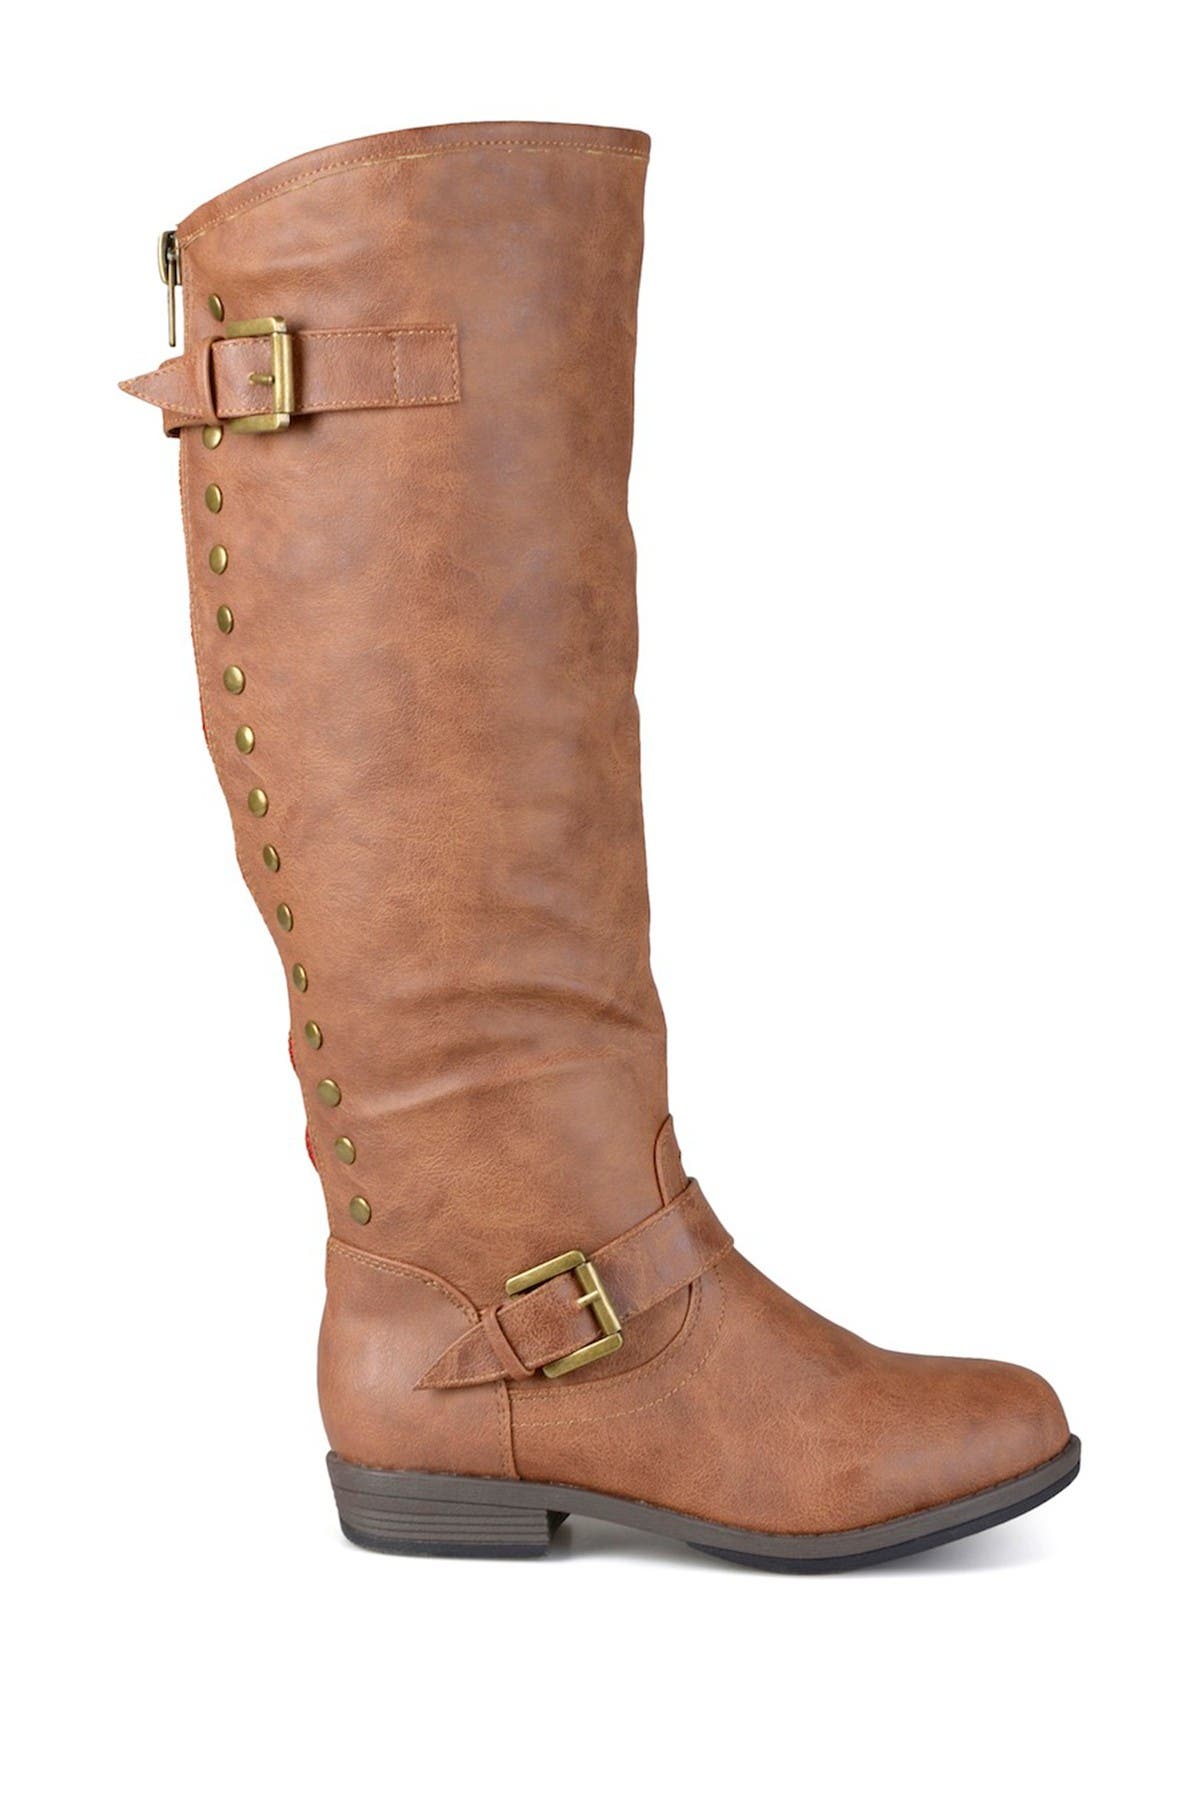 Journee Collection Spokane Riding Boot In Light/pastel Brown6